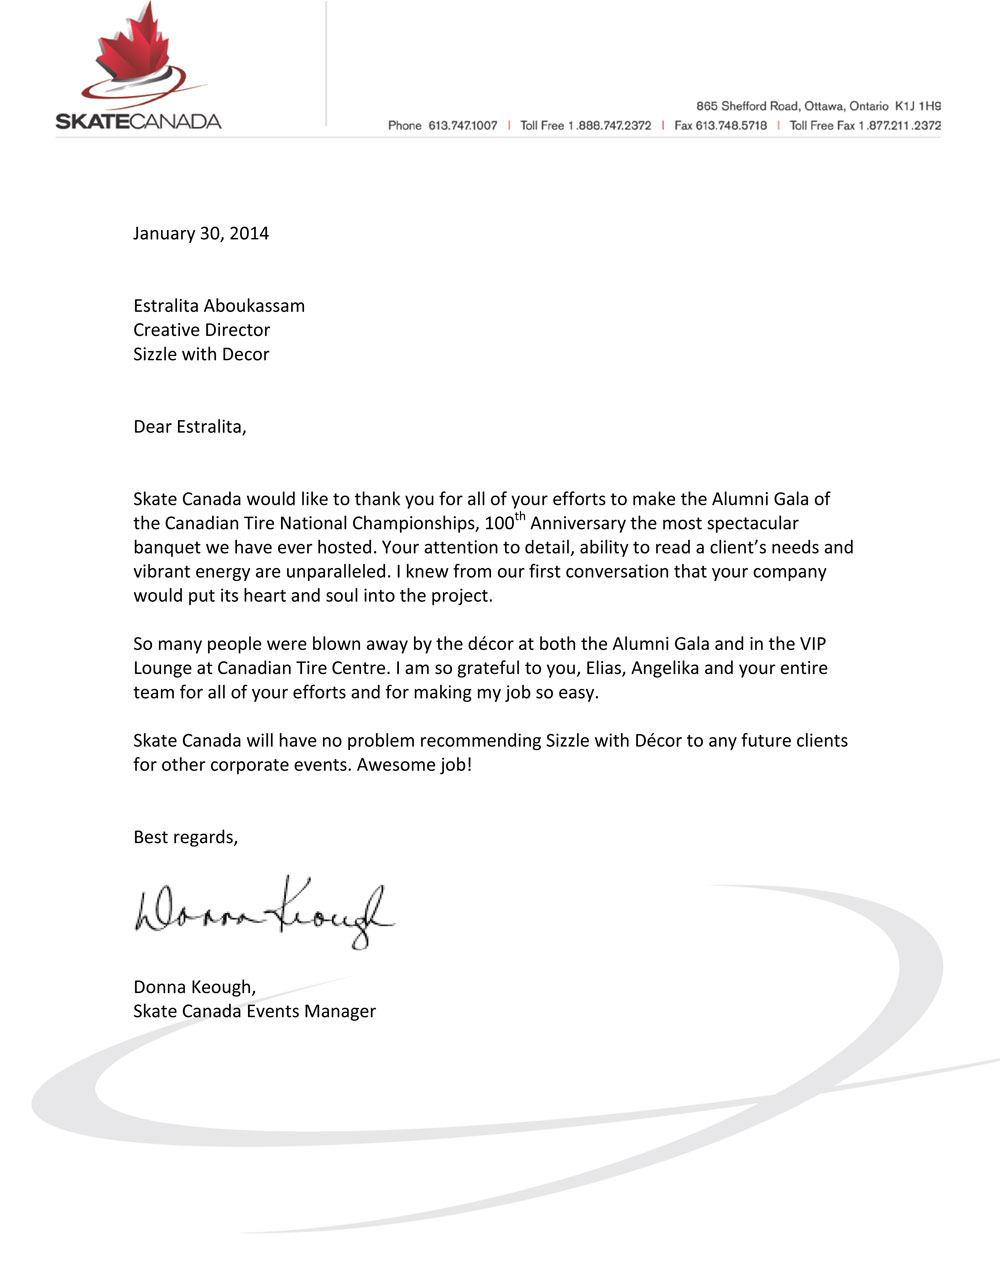 skate canada_letter of recommendation-Event Planning - Corporate Event